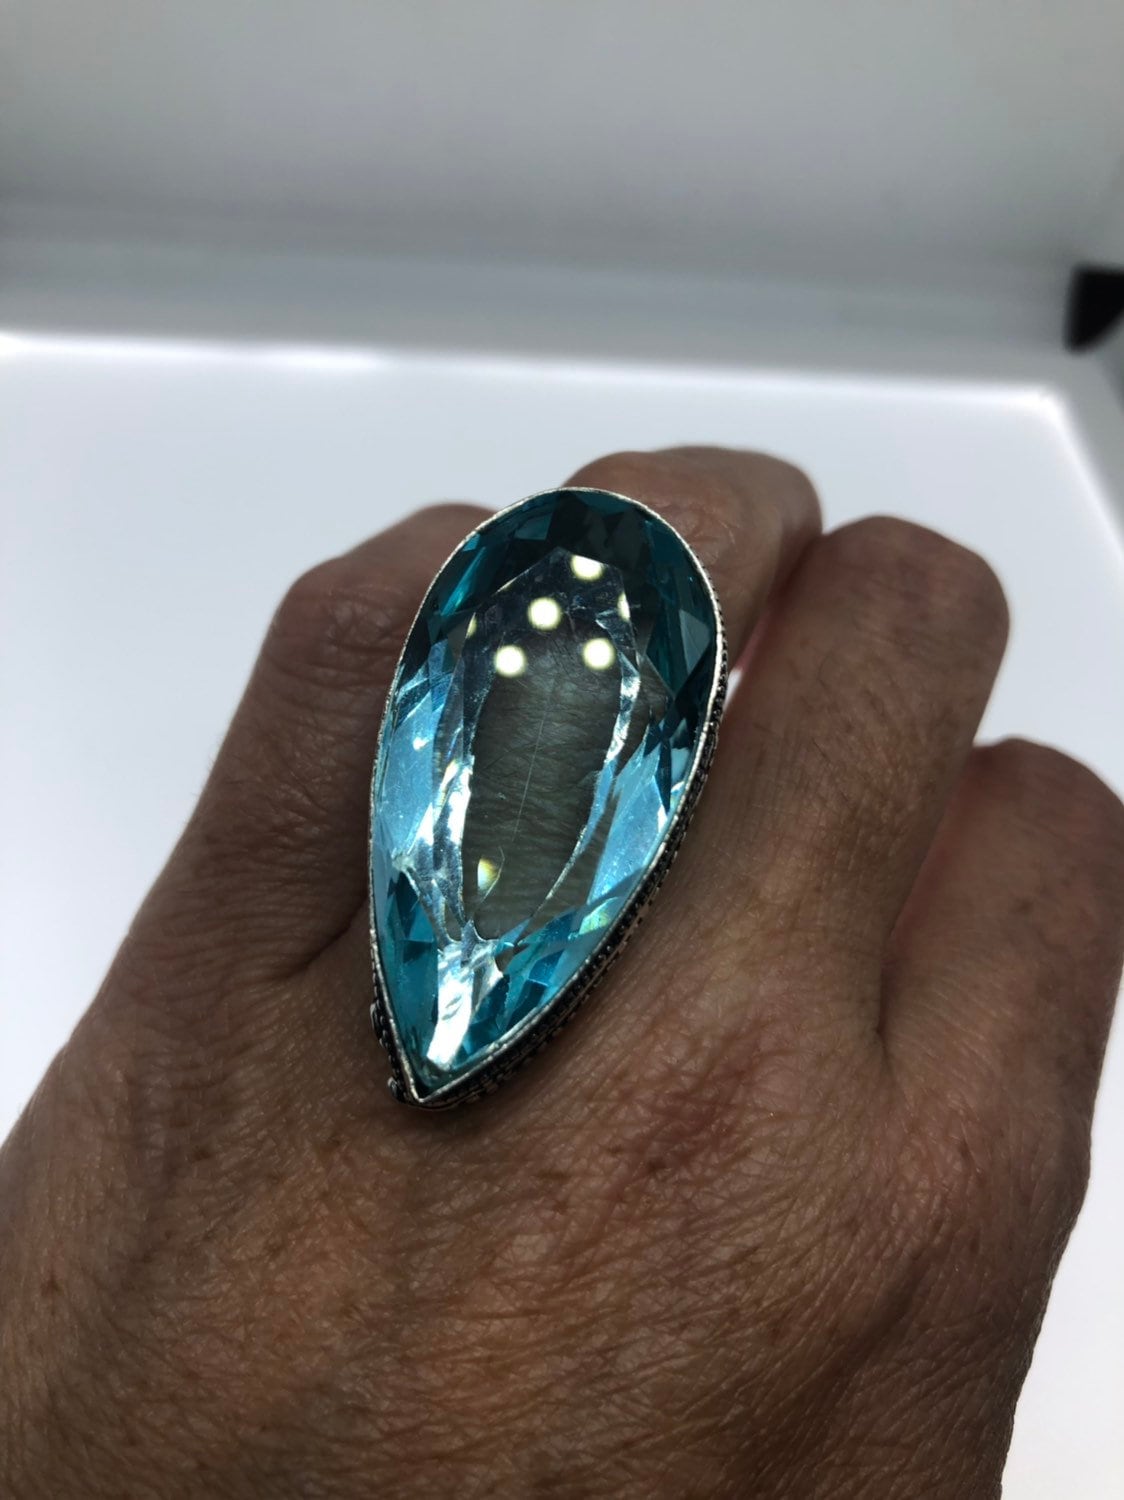 Vintage Aqua Vintage Art Glass Ring About 1.5 Inches Knuckle Ring